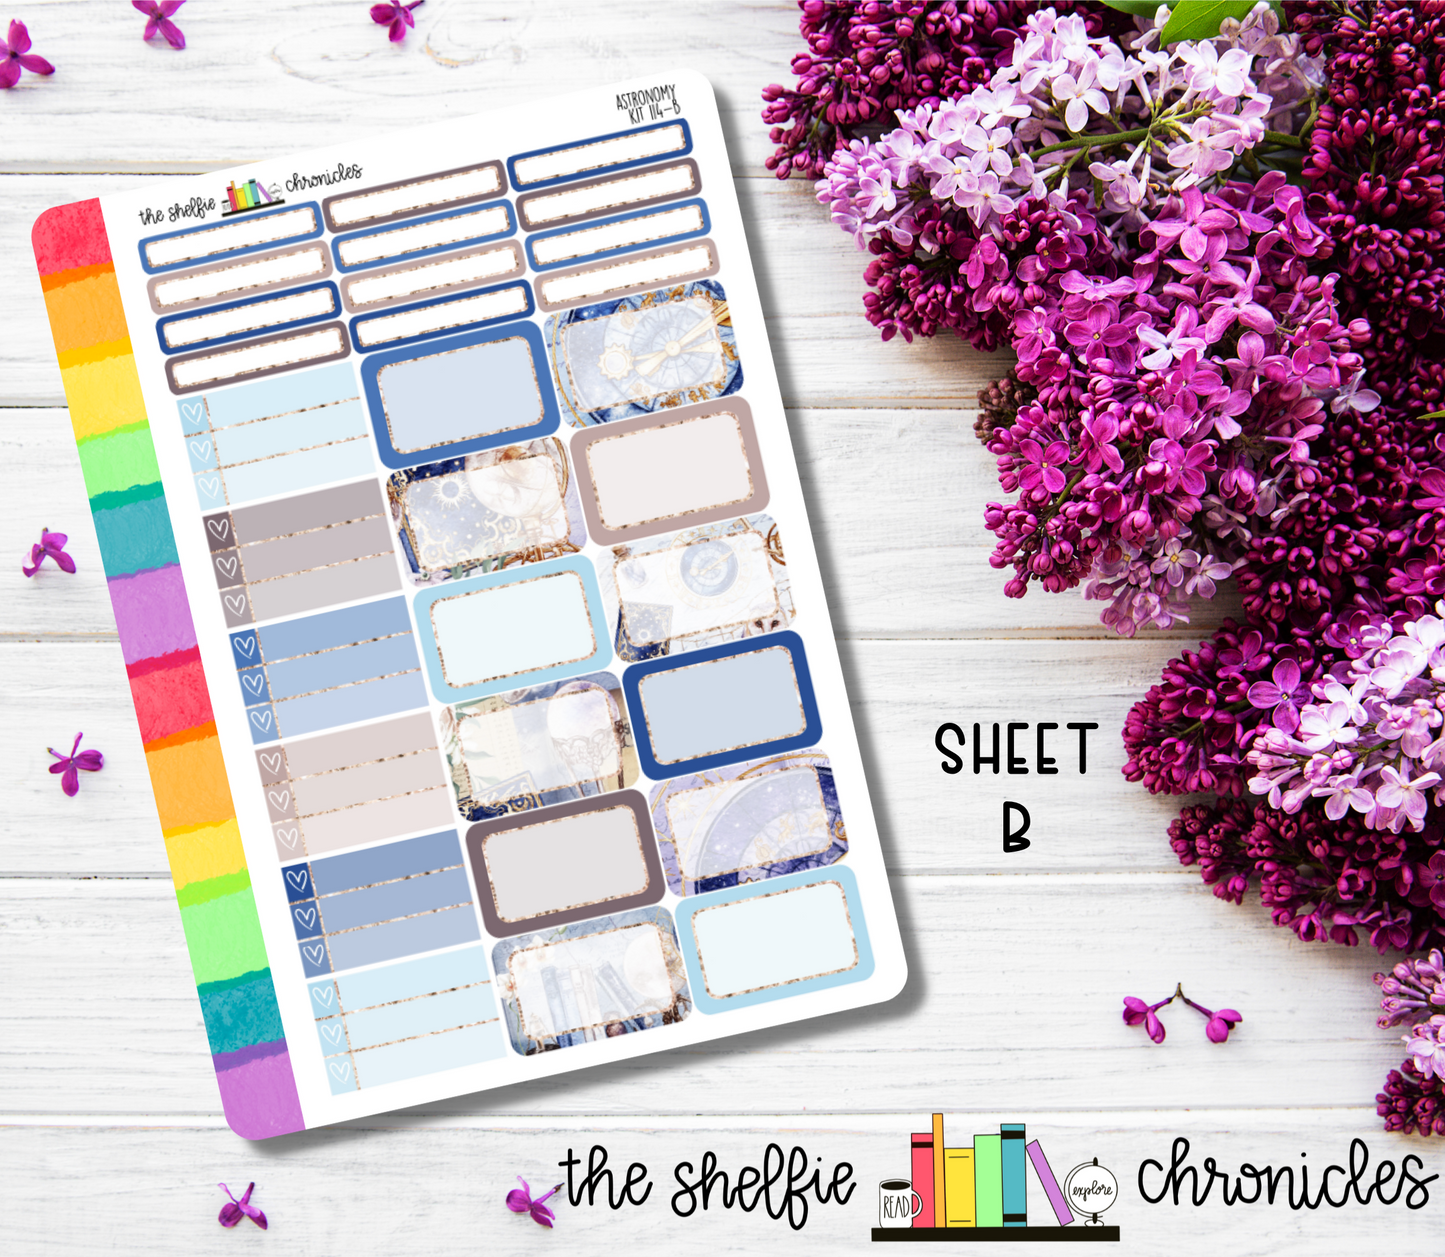 Kit 114 - Astronomy Weekly Kit - Die Cut Stickers - Repositionable Paper - Made To Fit 7x9 Planners